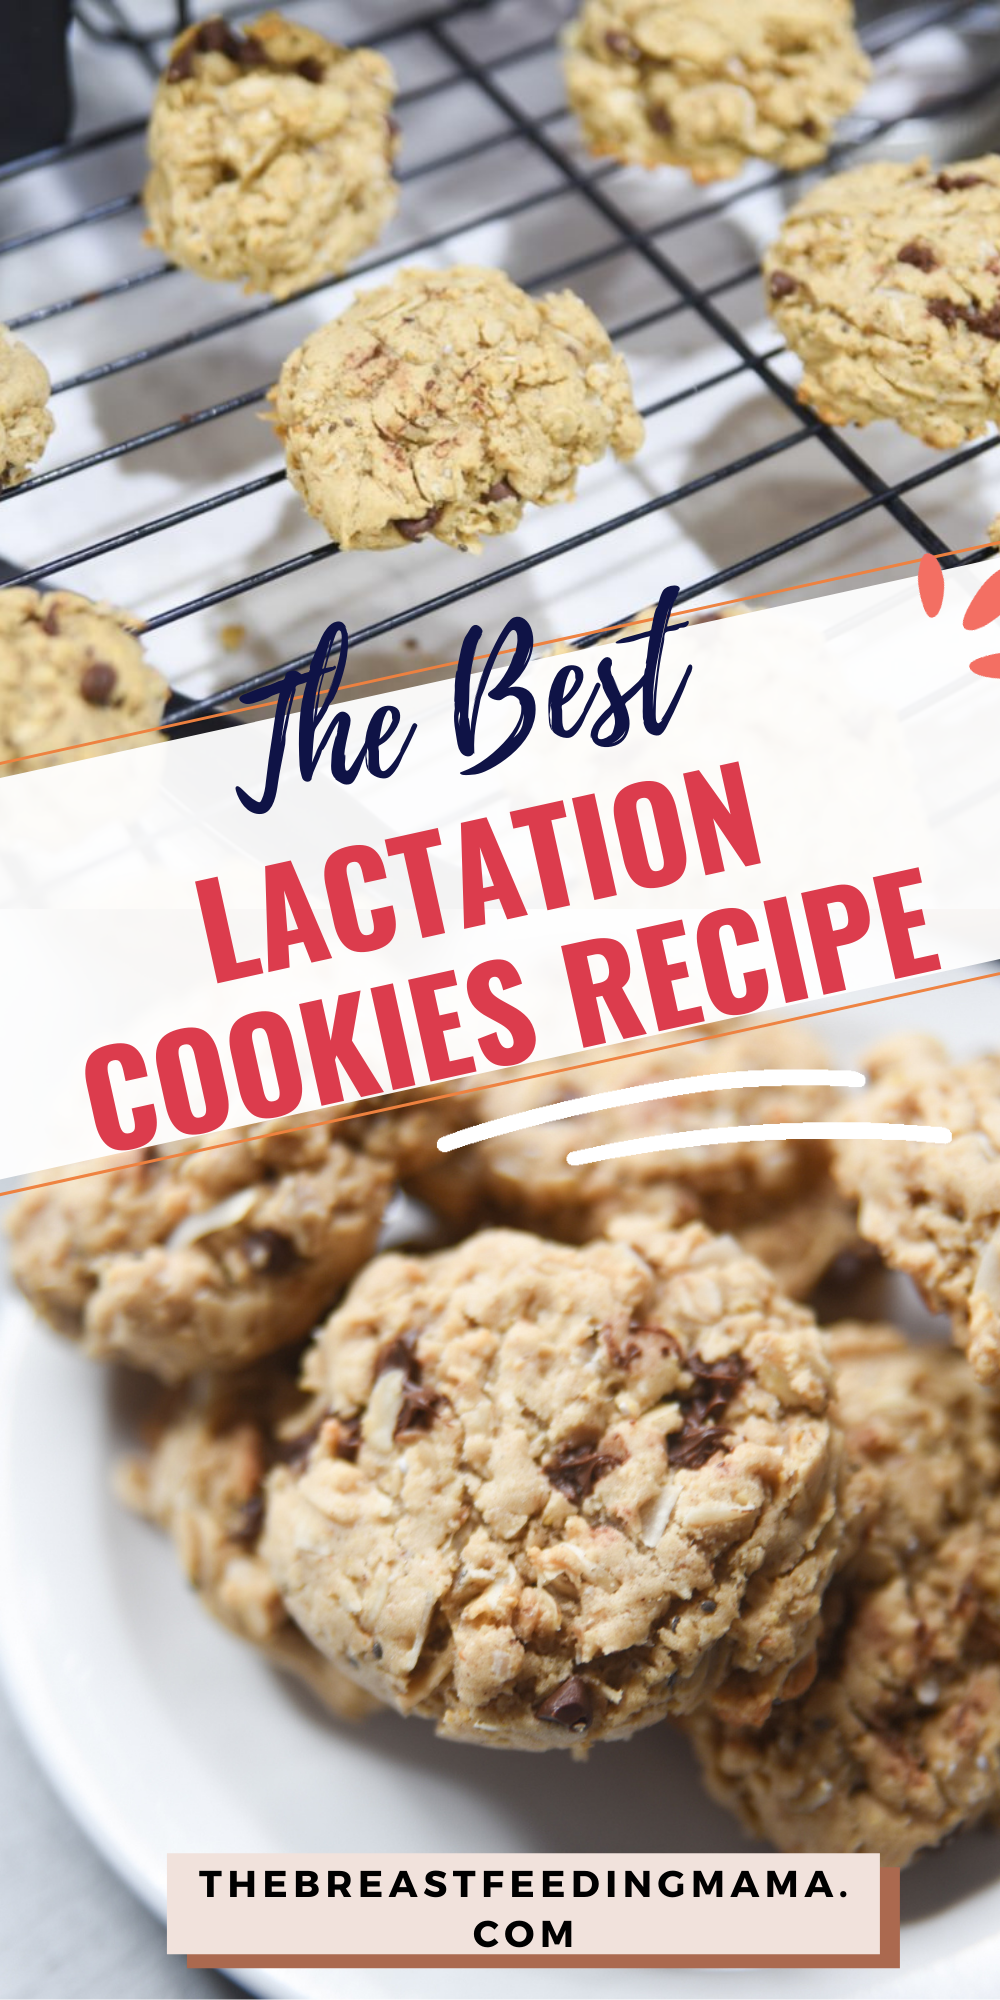 Are you looking for the BEST lactation cookie recipe that actually tastes good? These cookies are packed with protein and other nutrients that are known to help increase breast milk production and support health lactation. They're also delicious, so you'll be happy to snack on them any time of day!